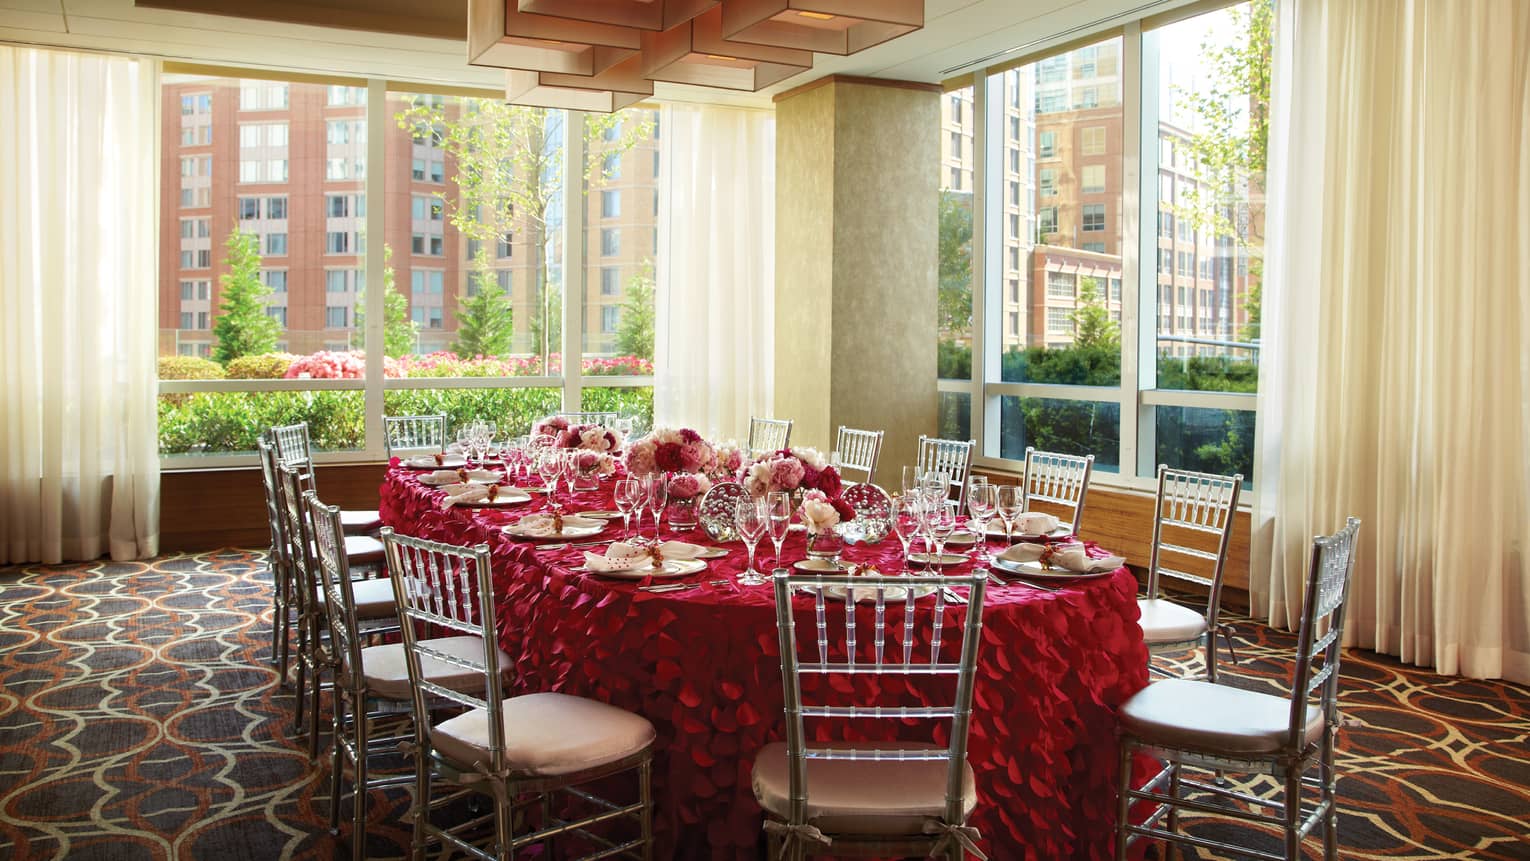 Verona room, round private dining table with red ruffled linen, bright corner windows